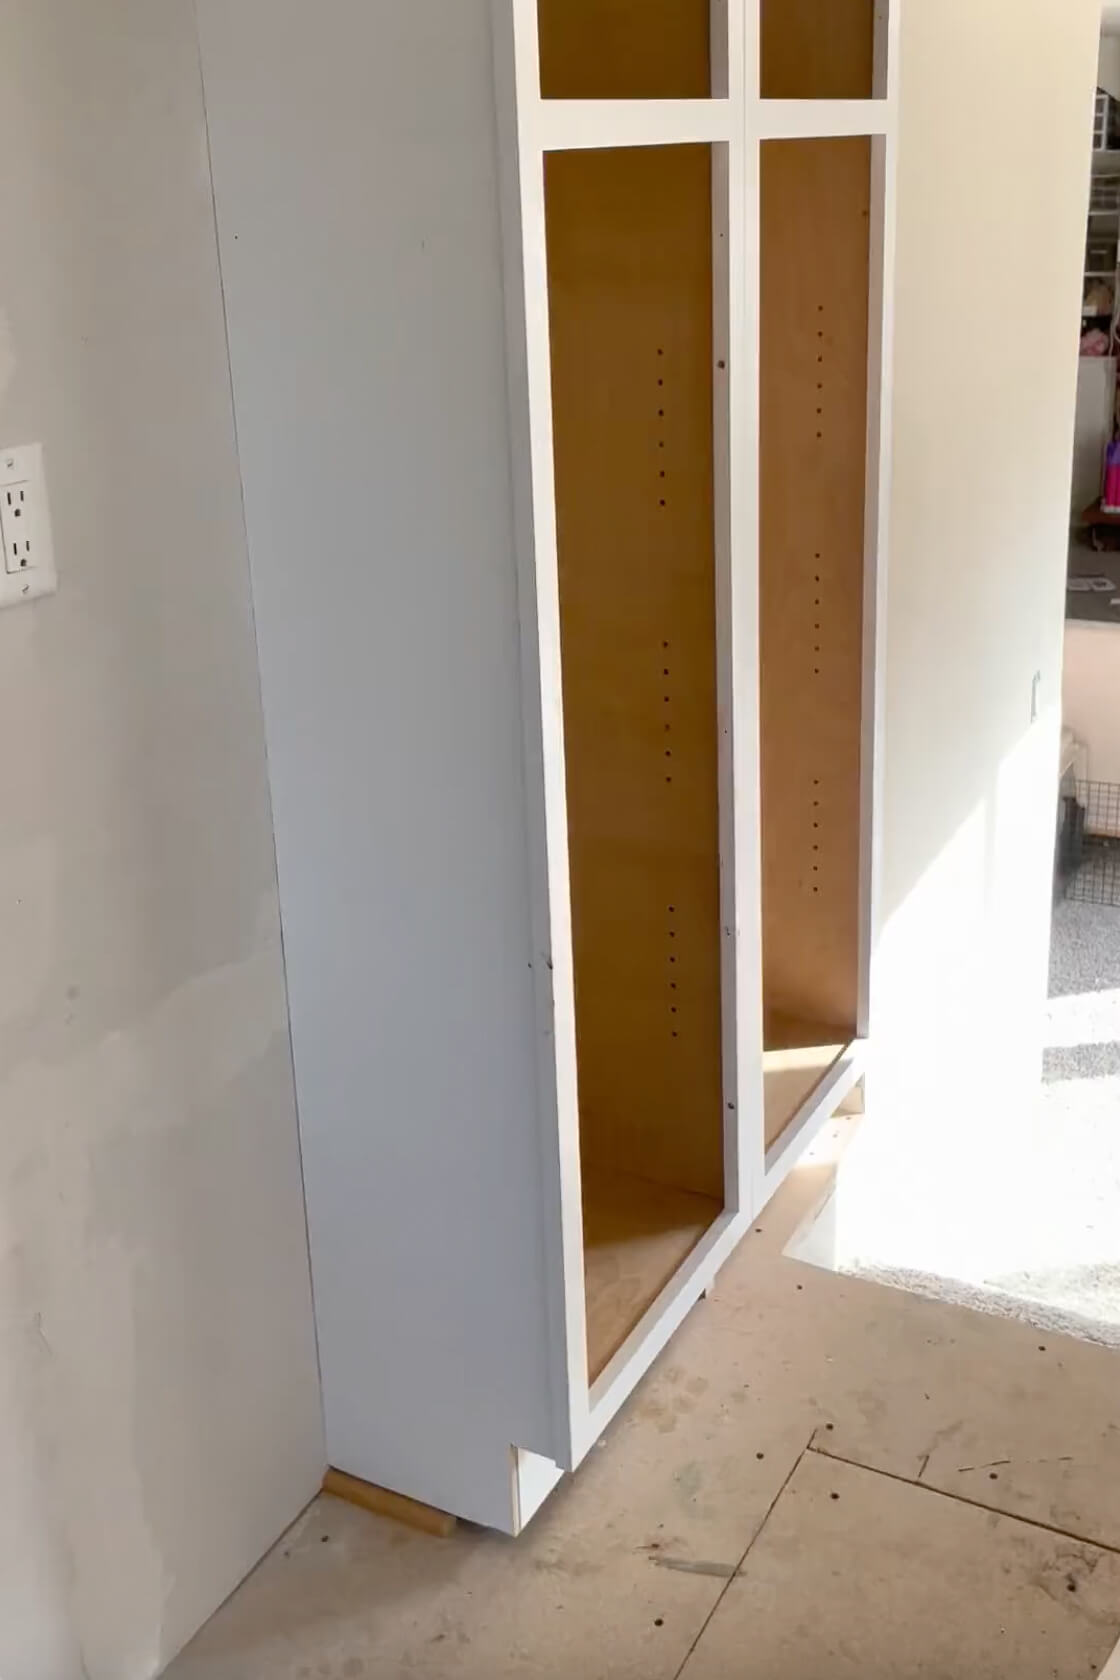 Using shims to level a cabinet on an uneven floor.